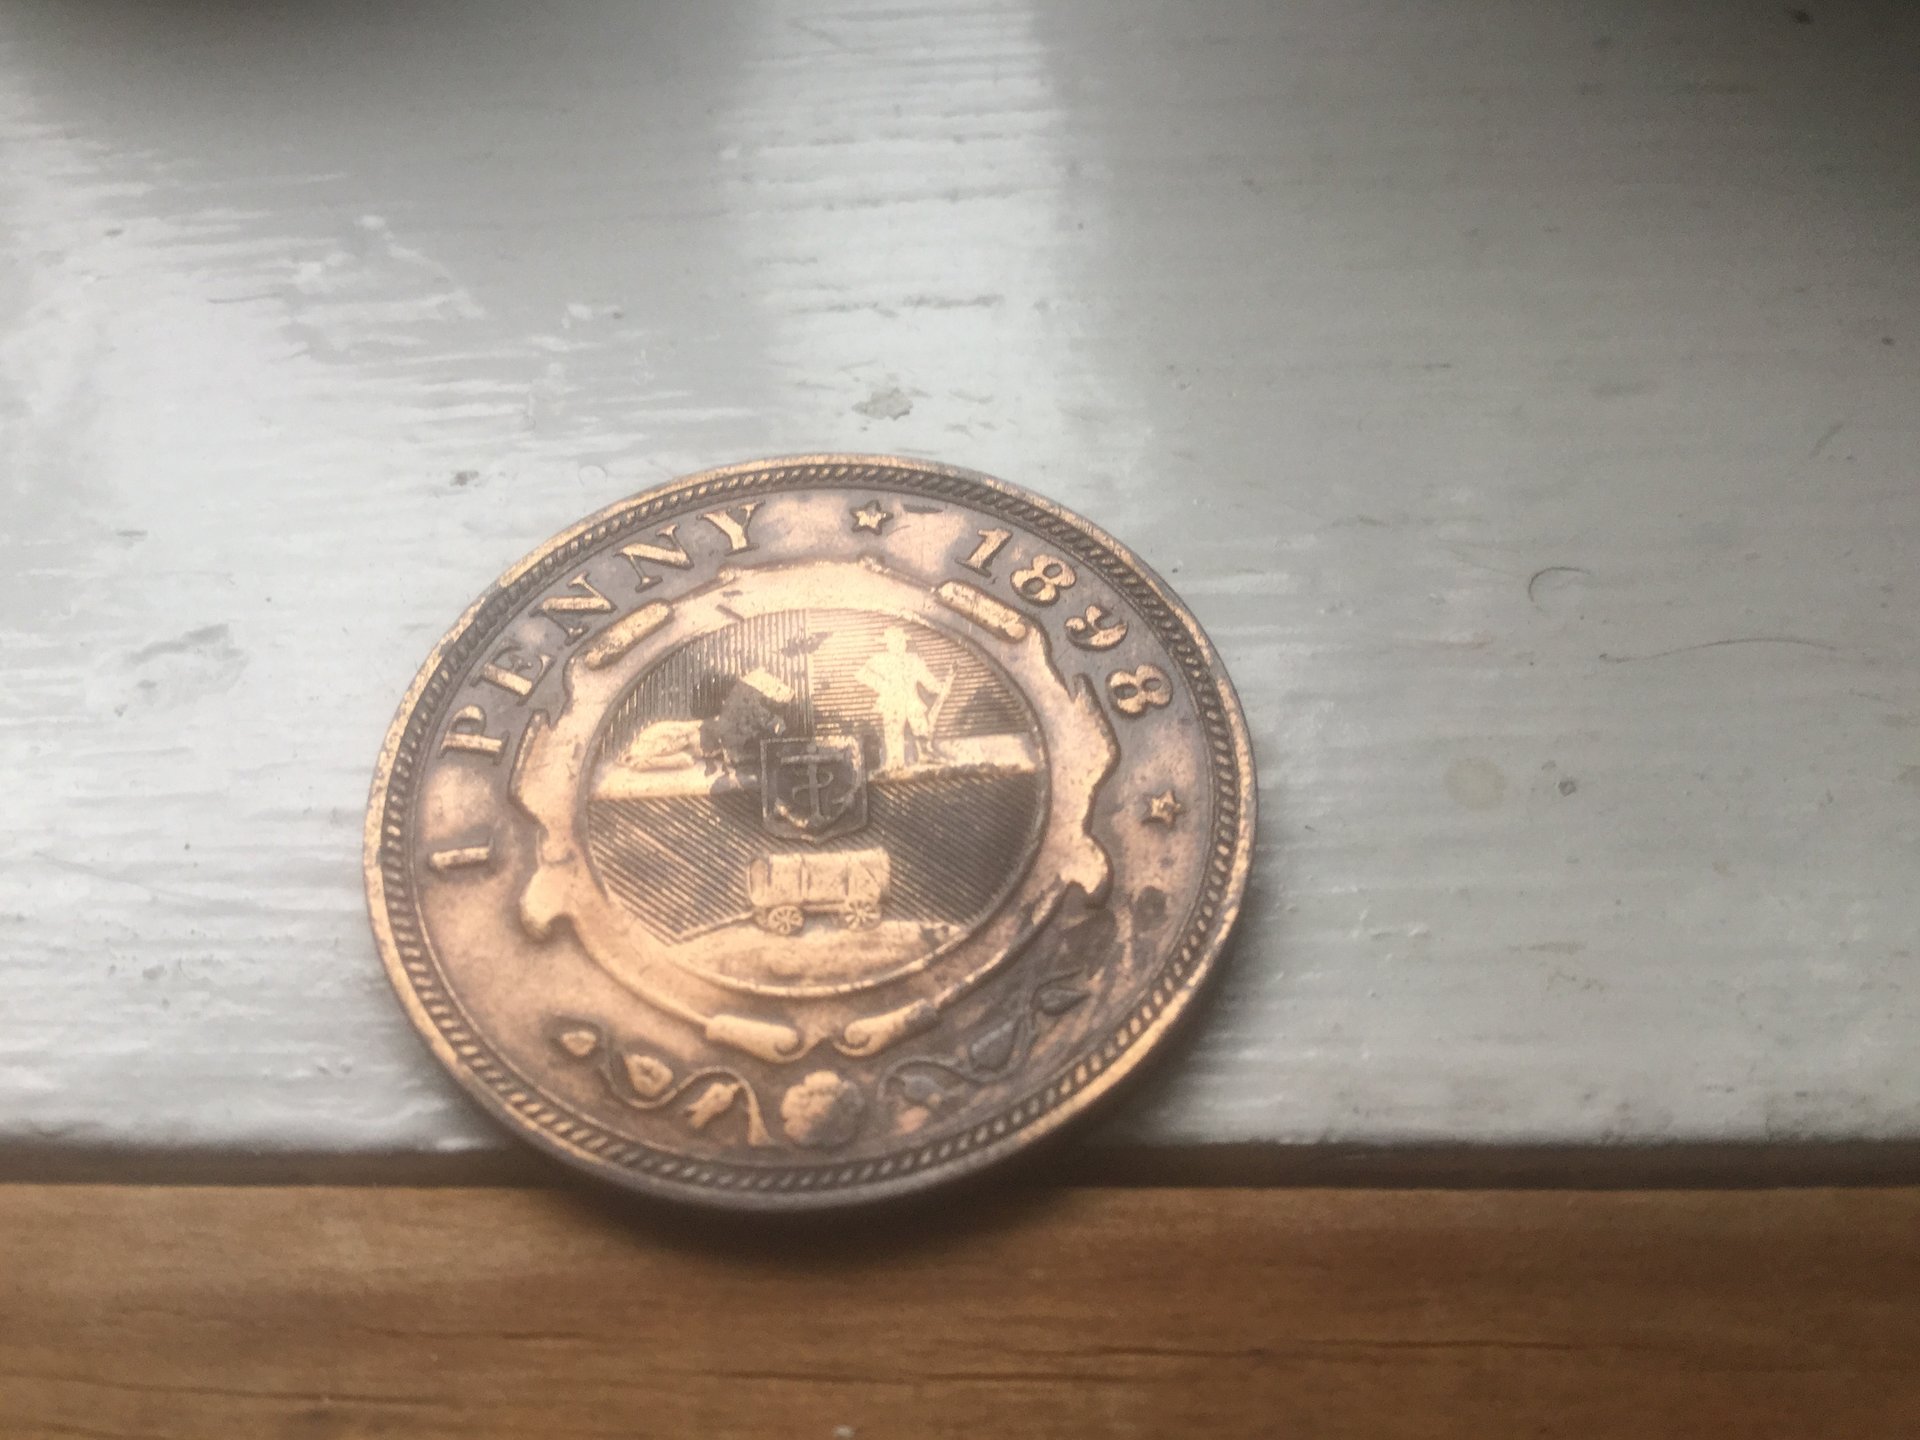 Counterfeit South African Penny? | Coin Talk